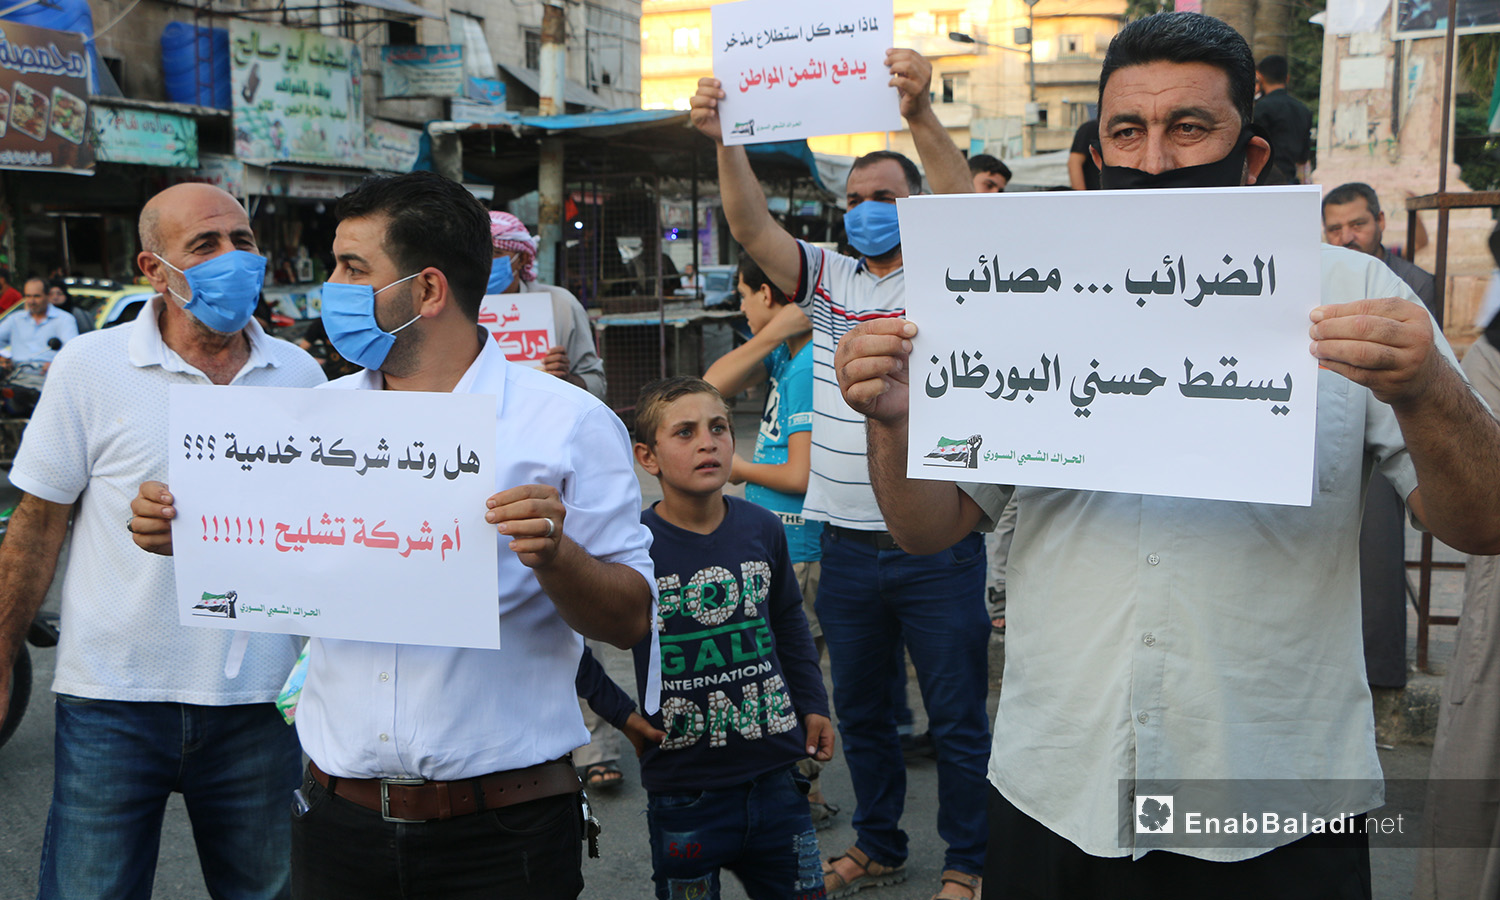 A protest in Idlib city against fuel prices’ increase and high living costs – 04 August 2020 (Enab Baladi / Anas al-Khouli)